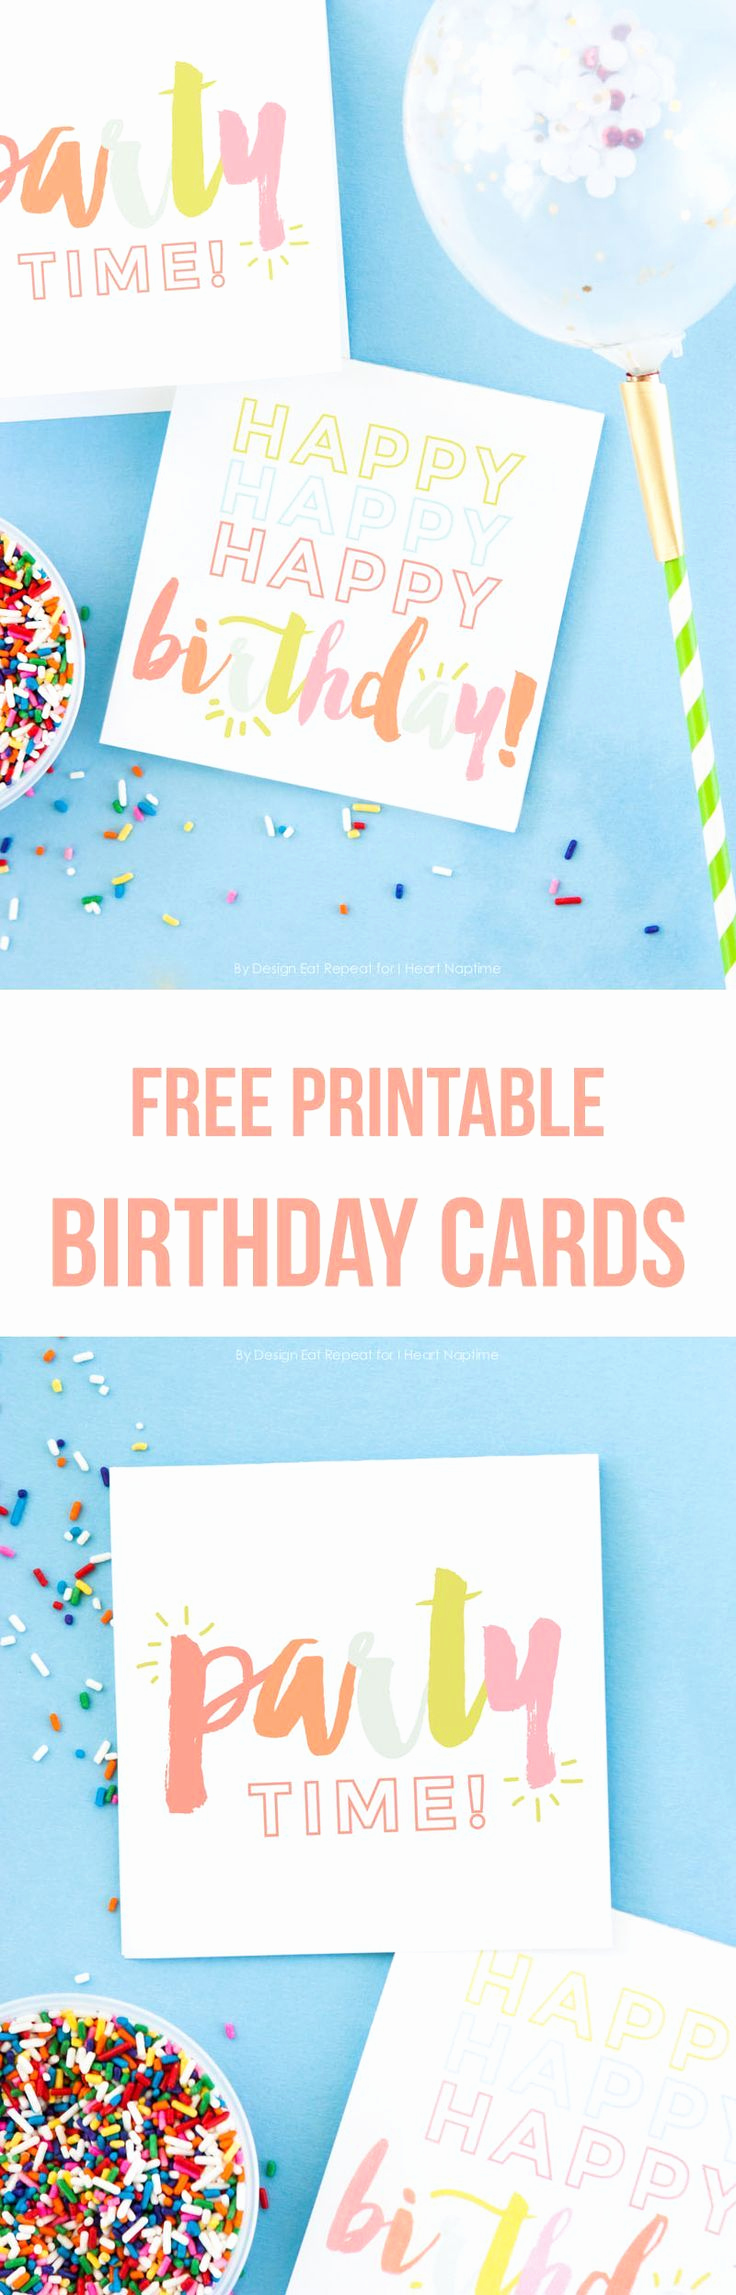 Free Printable Funny Birthday Cards Lovely 1000 Birthday Card Quotes On Pinterest